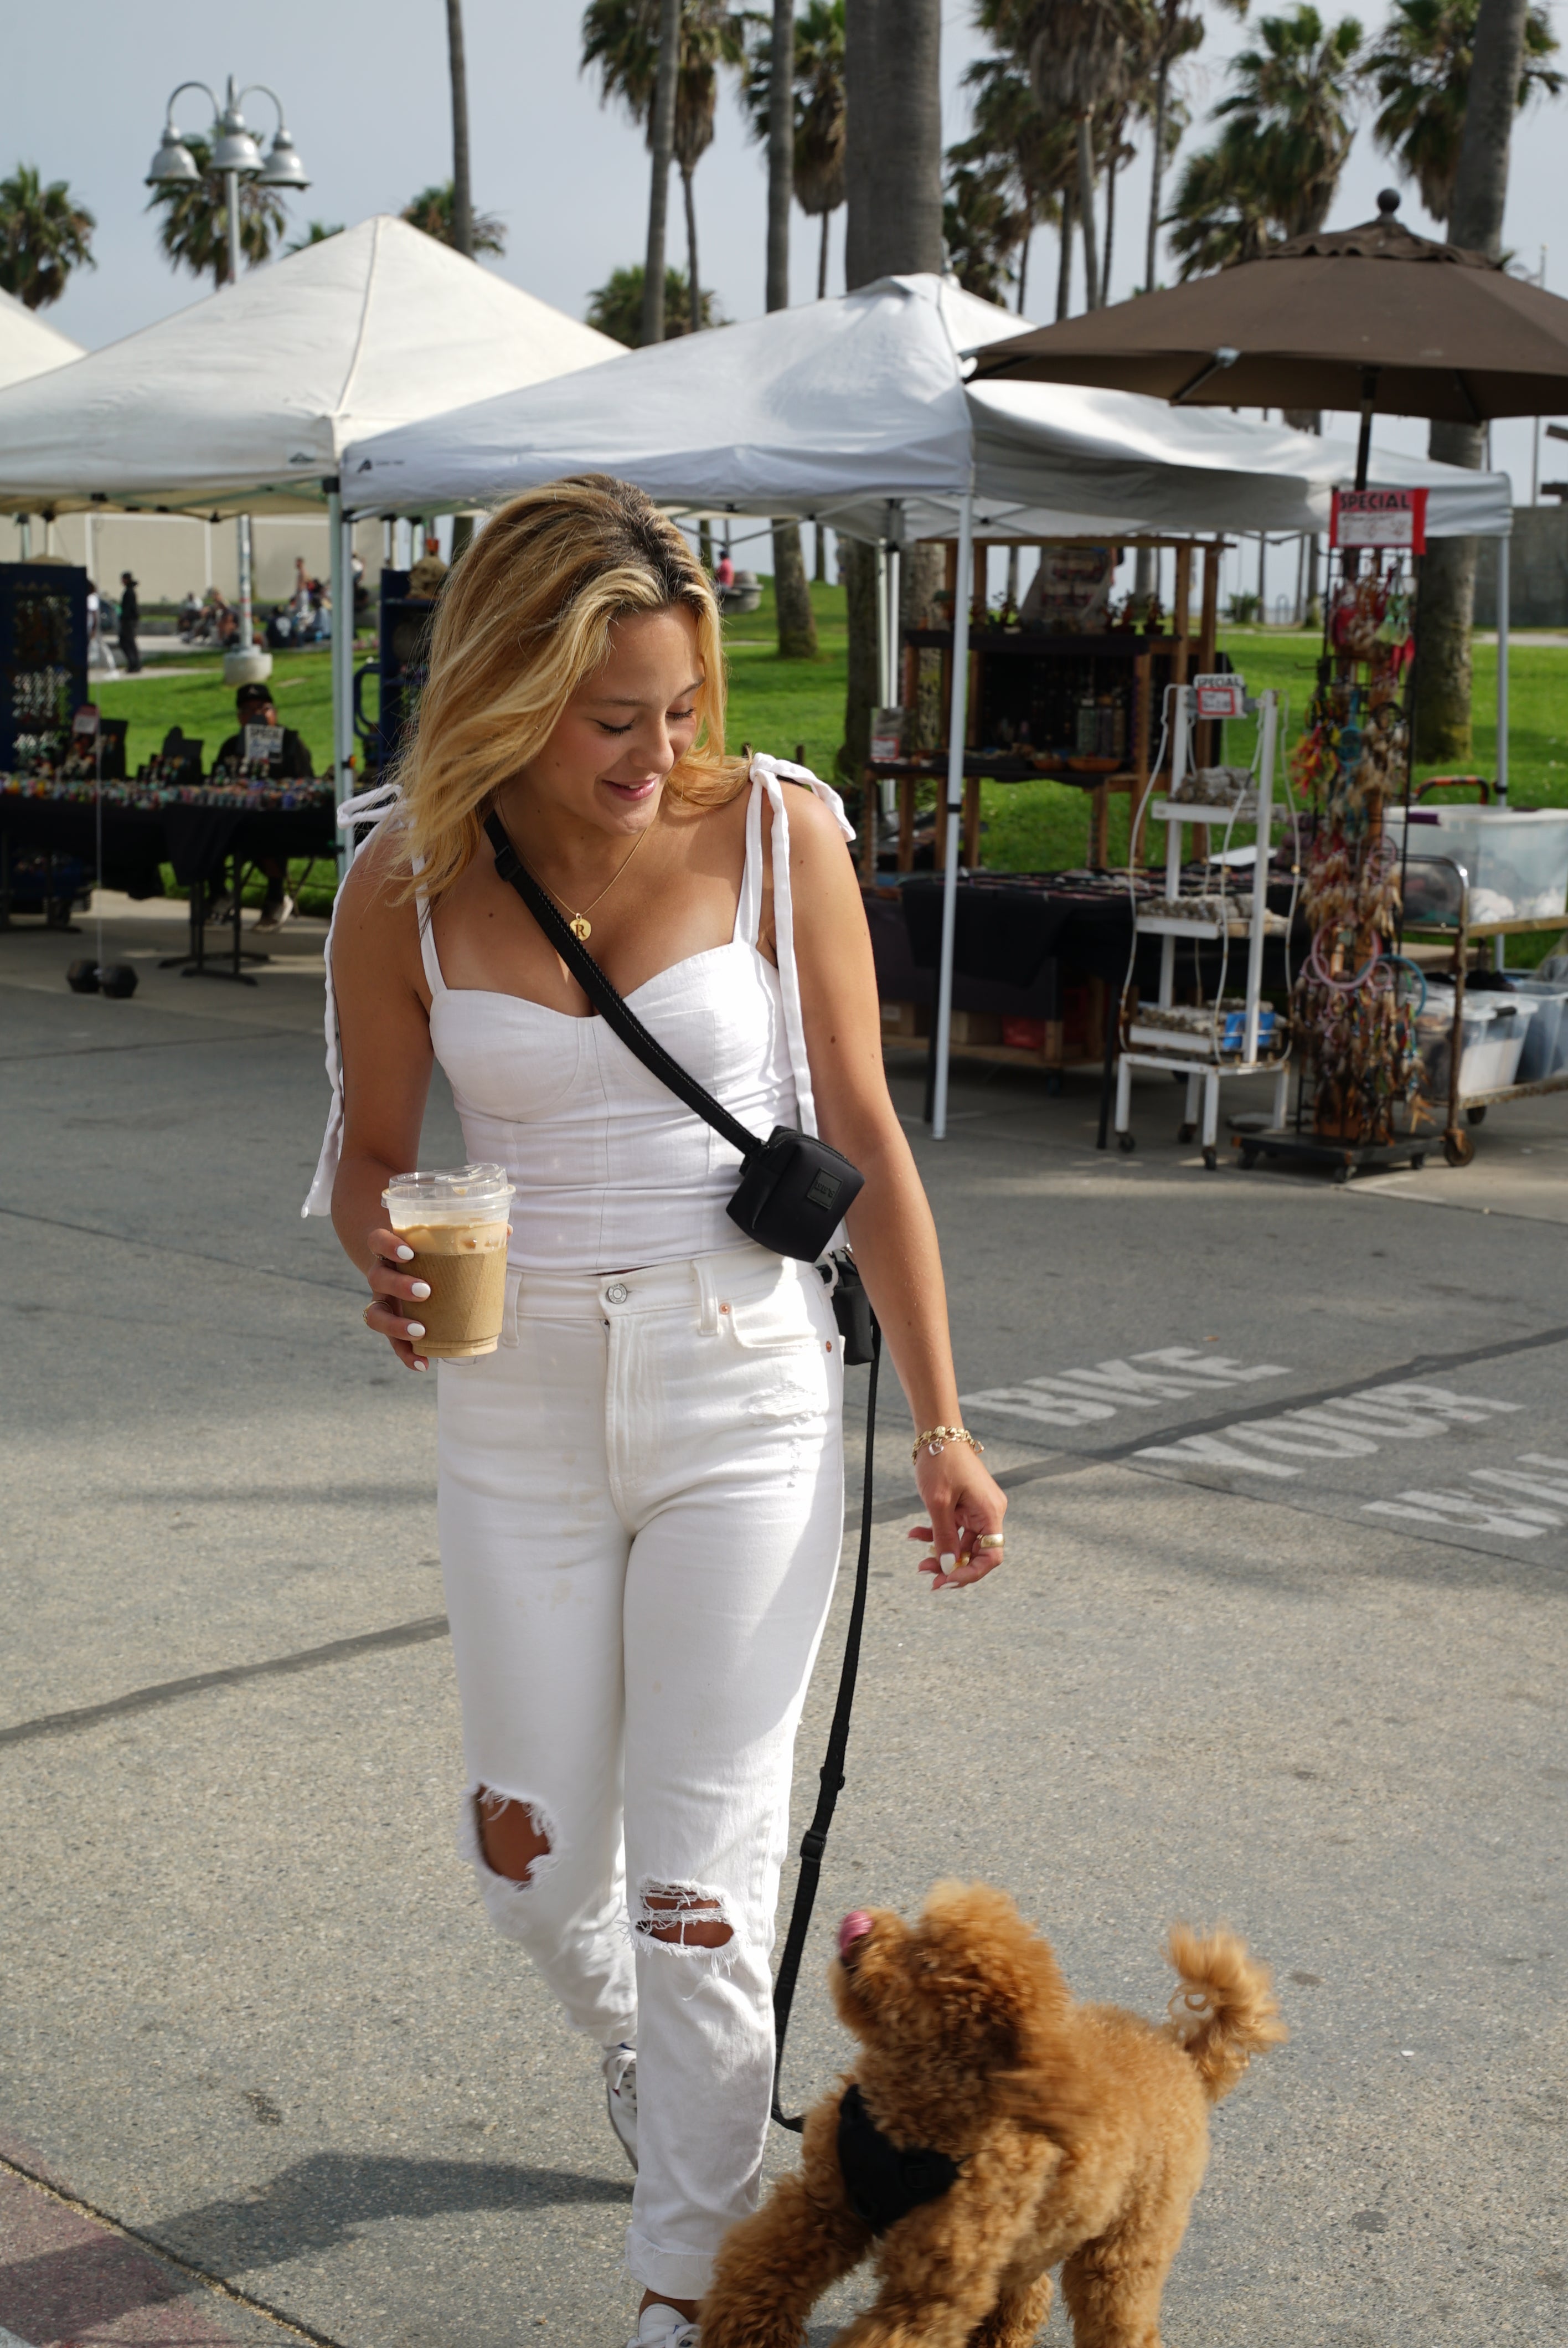 Blonde woman in a white outfit walking with a small brown dog on a hands-free leash in stealth black color from Lulu's from Cali, worn as a crossbody, at an outdoor market. She is holding a cup of coffee and smiling down at the dog